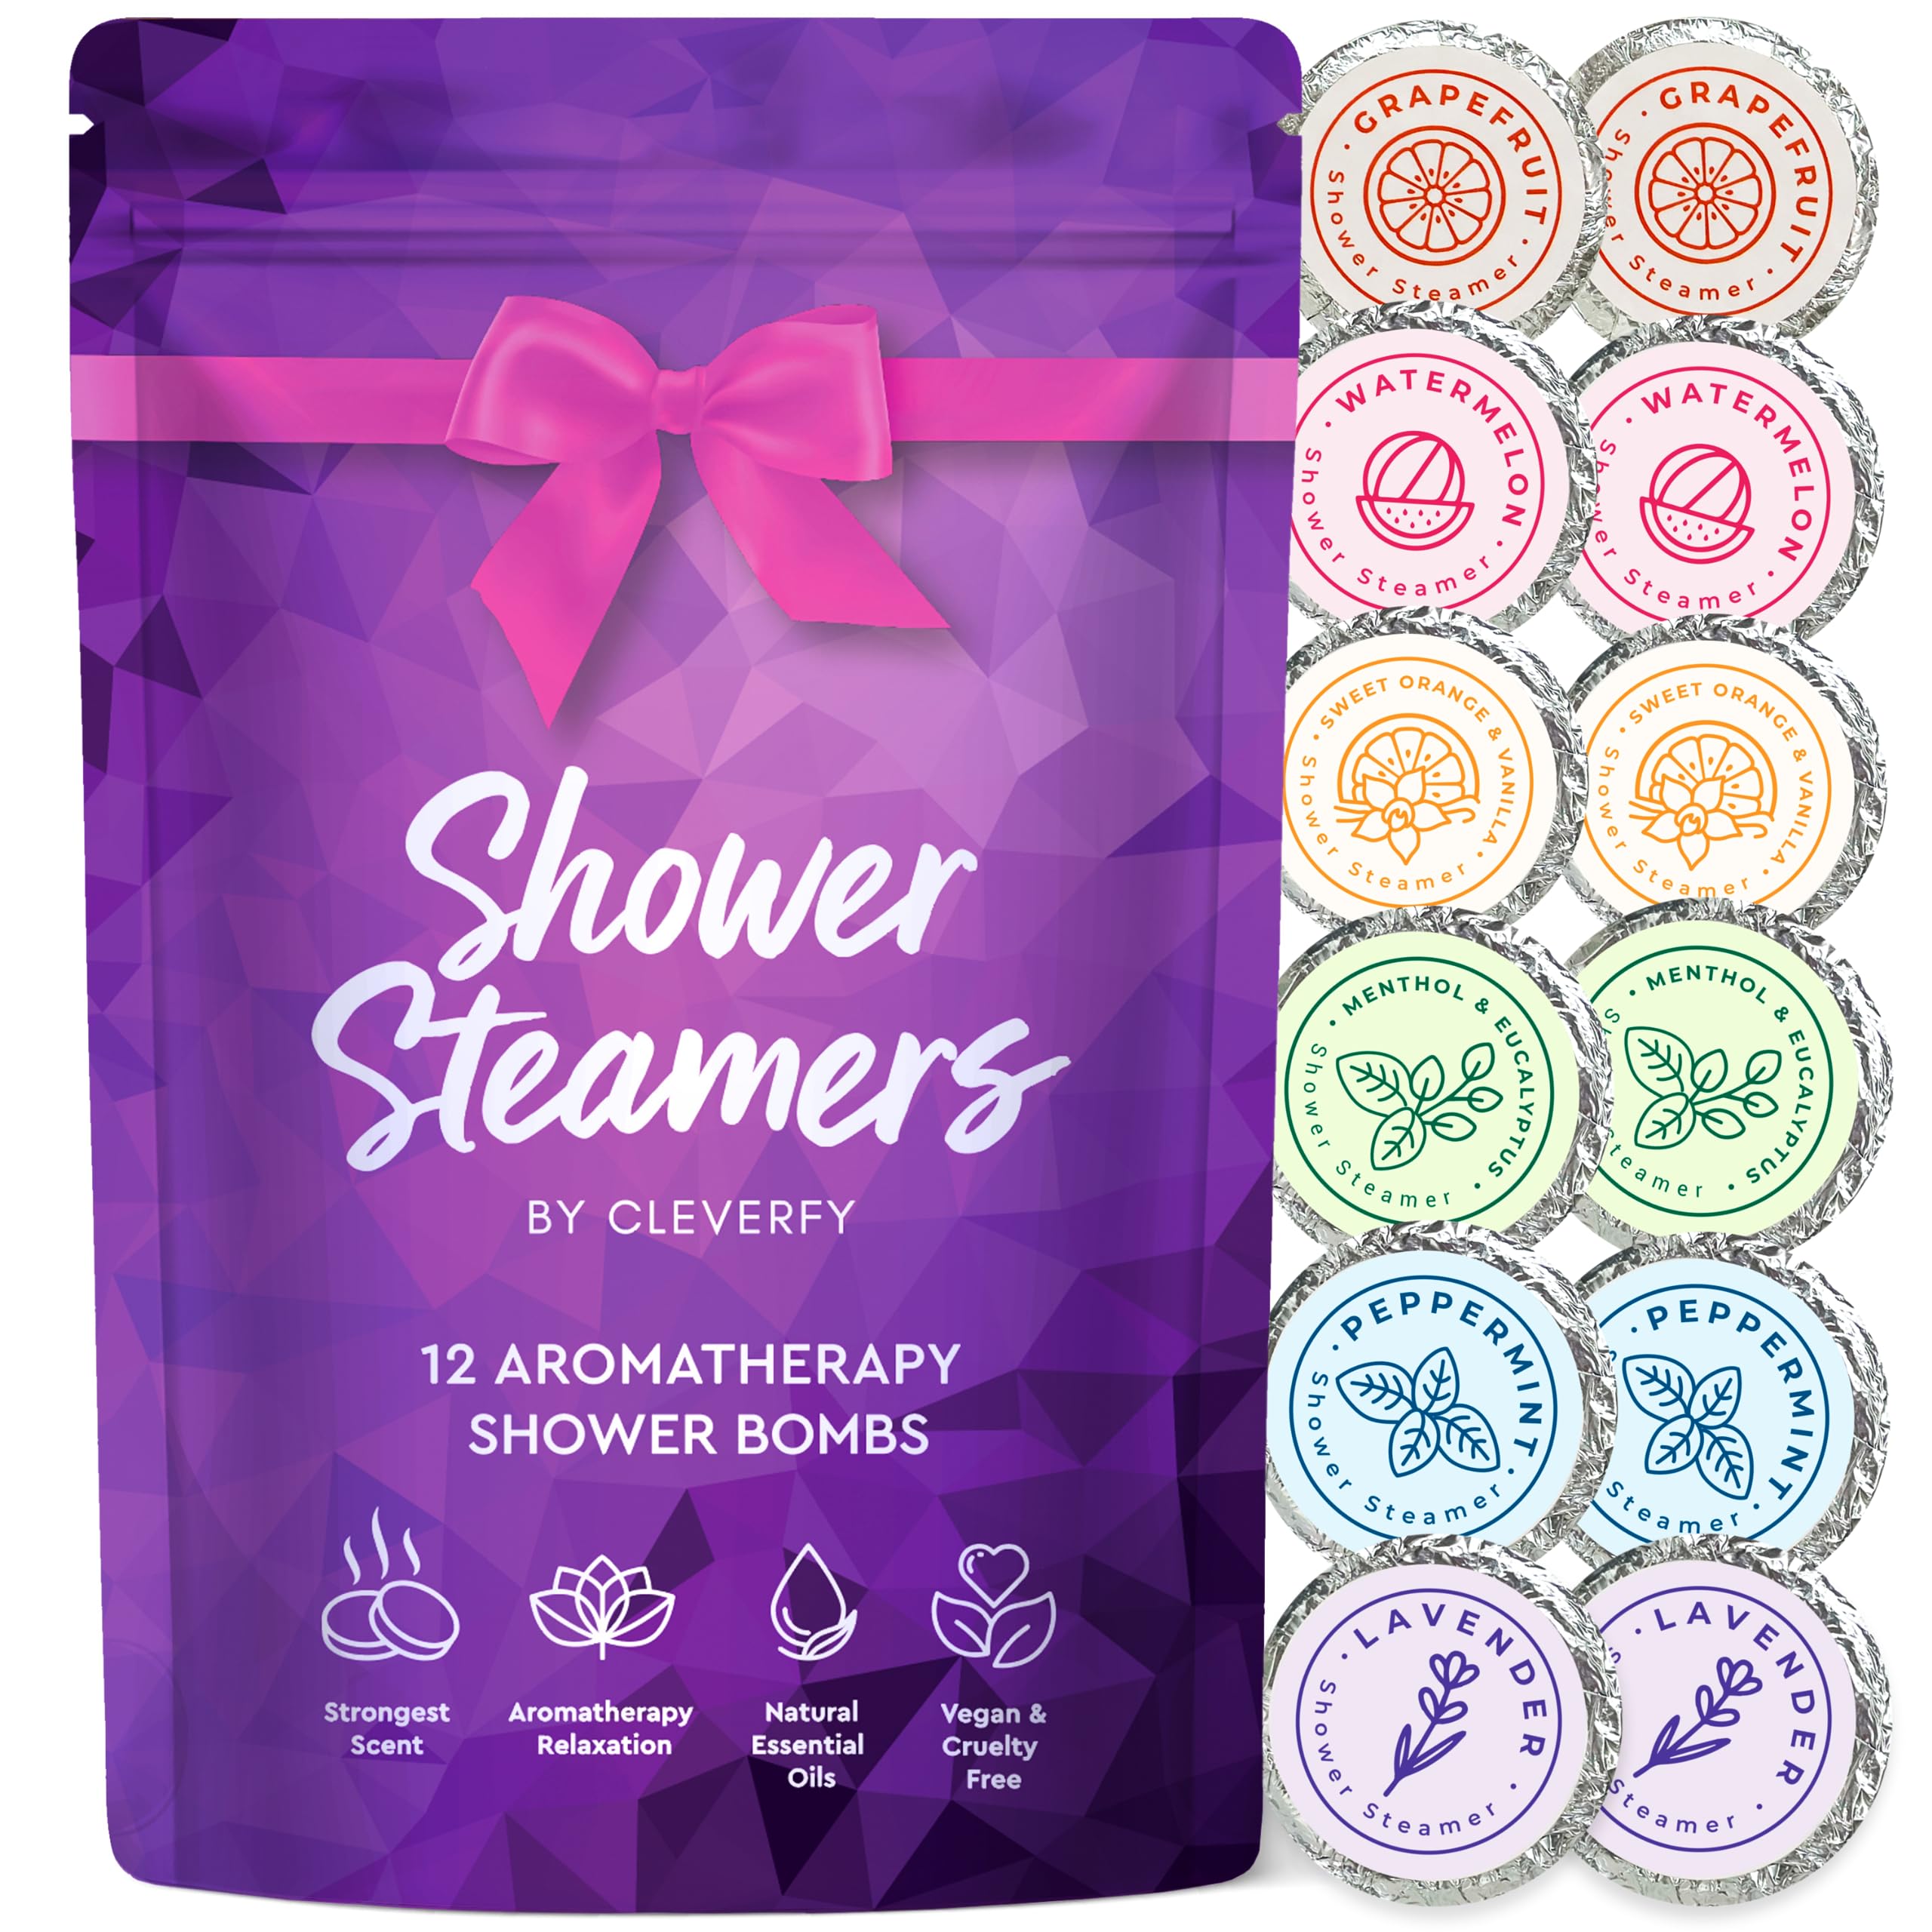 Cleverfy Shower Steamers Aromatherapy - Pack of 12 Shower Bombs with Essential Oils. Self Care and Relaxation Birthday Gifts for Women and Men. Purple Set